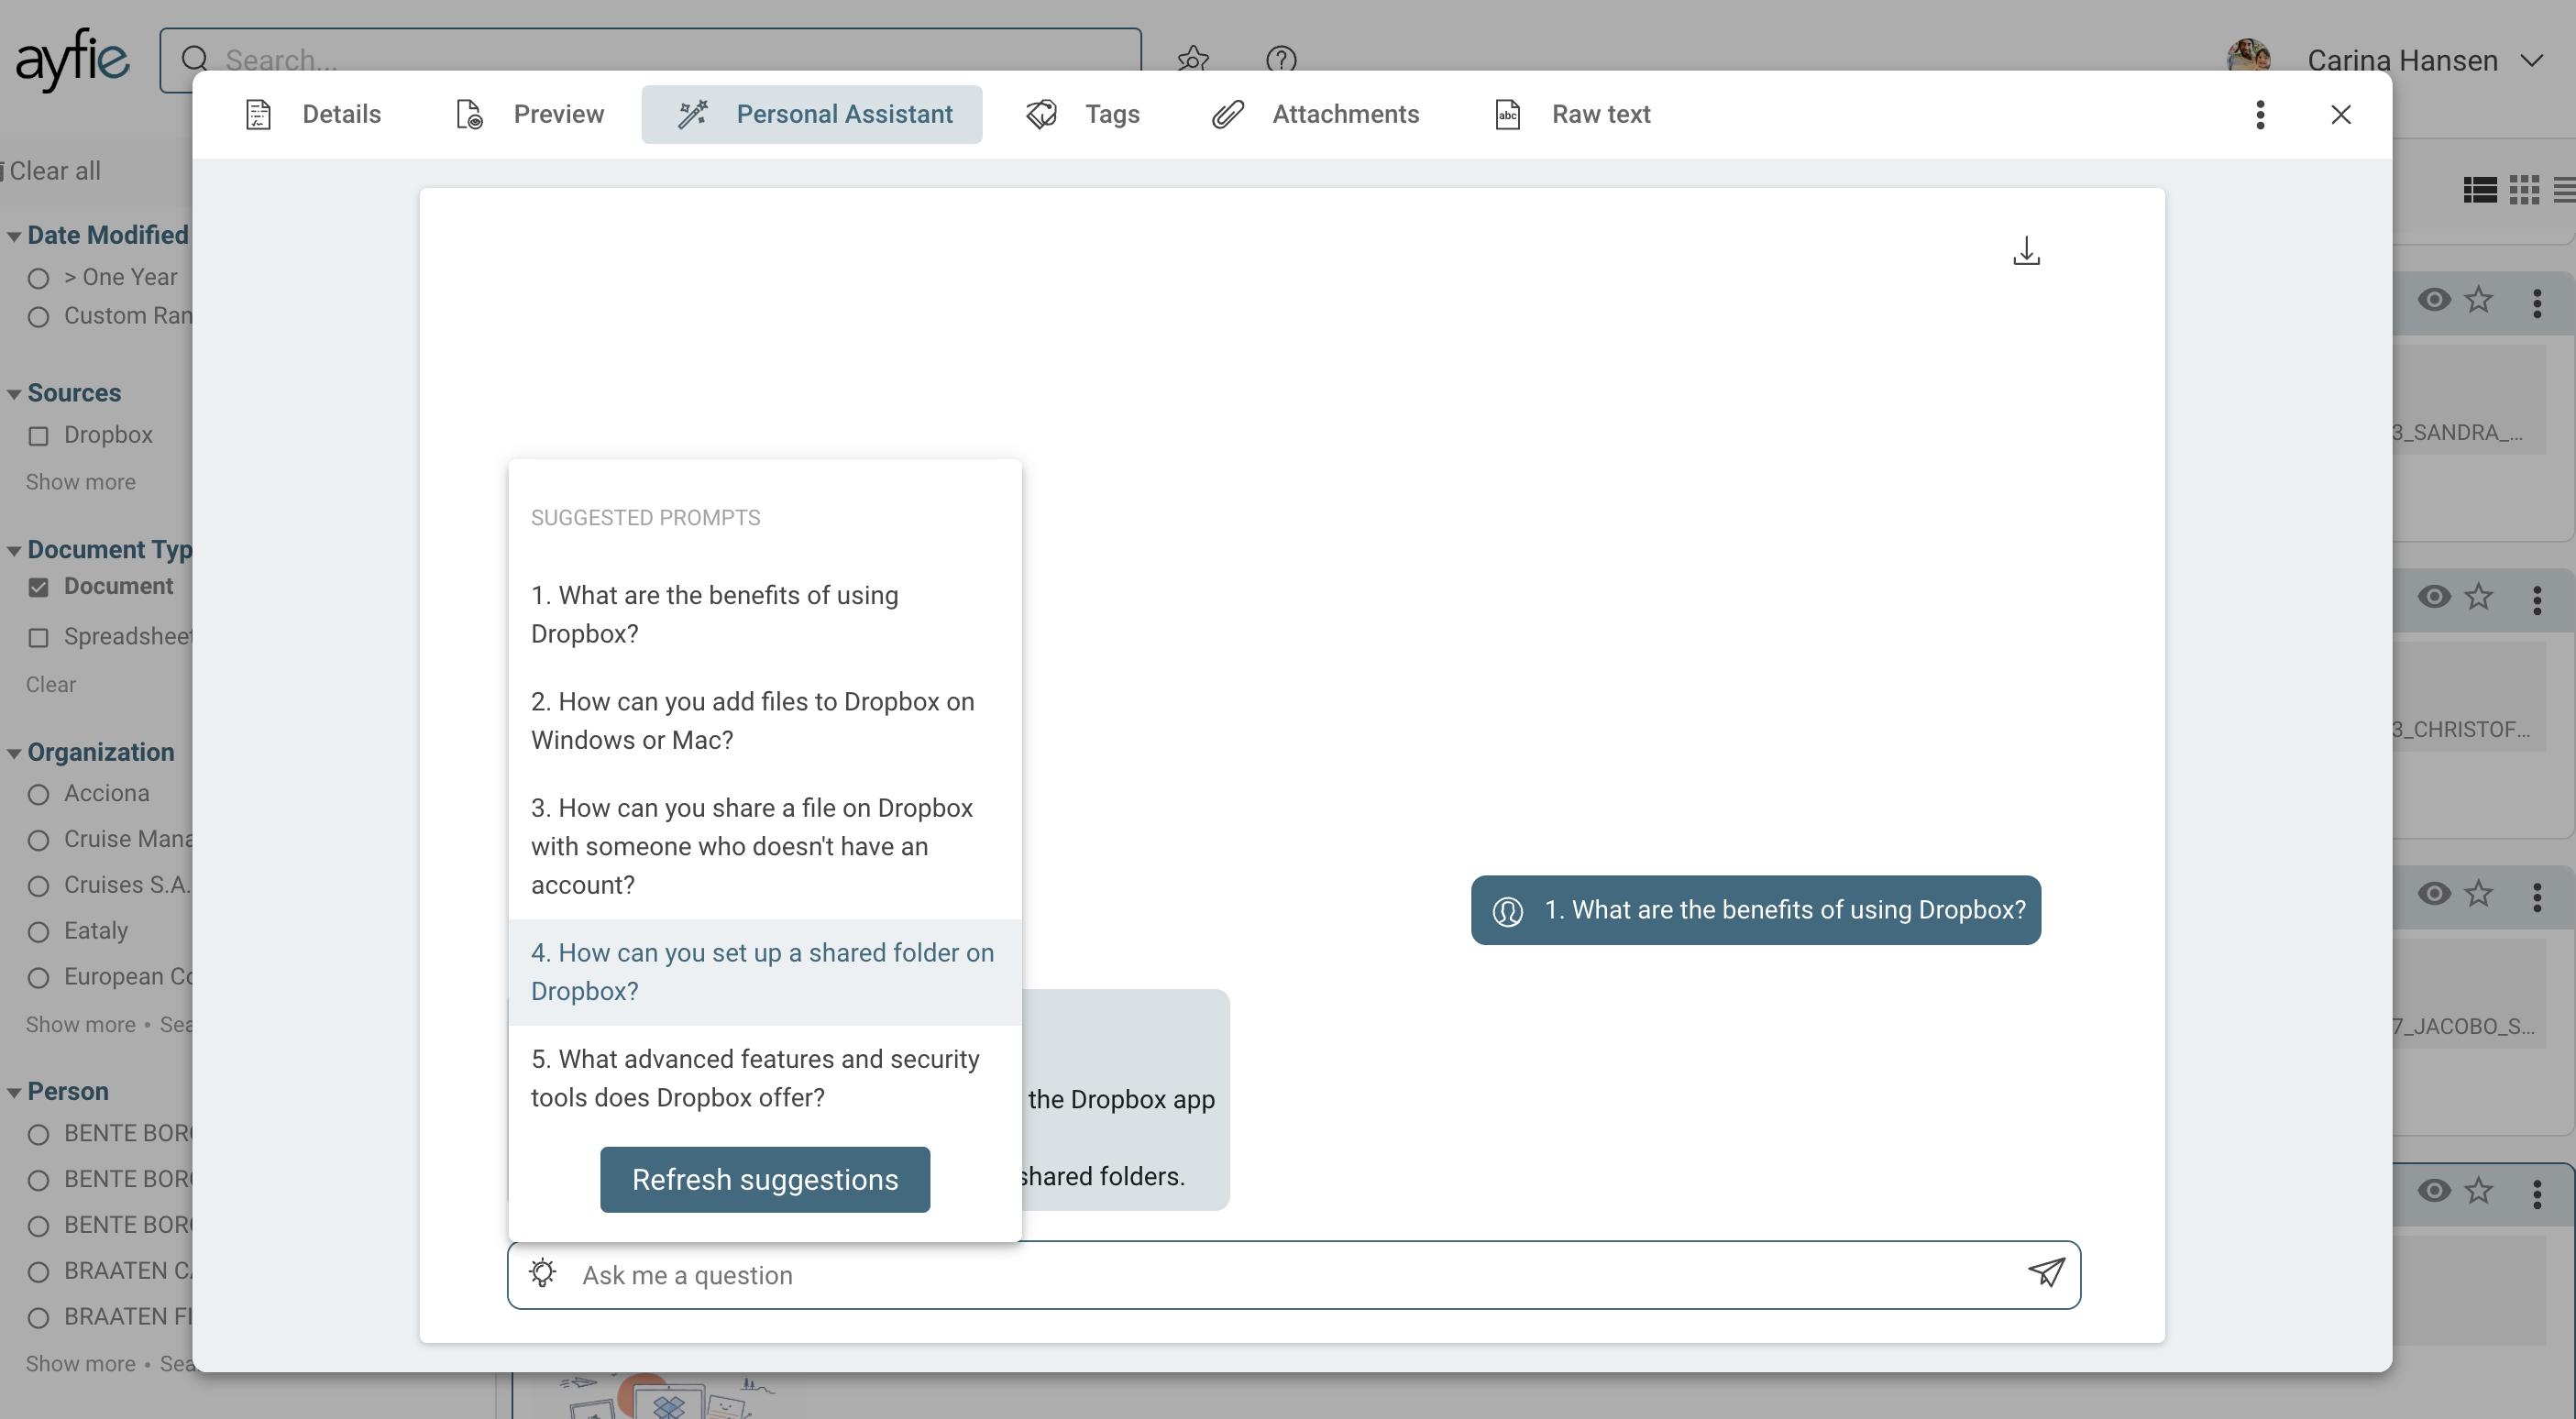 Screenshot showing prompts form the Ayfie Platform for Business fueled with the AI Personal Assistant